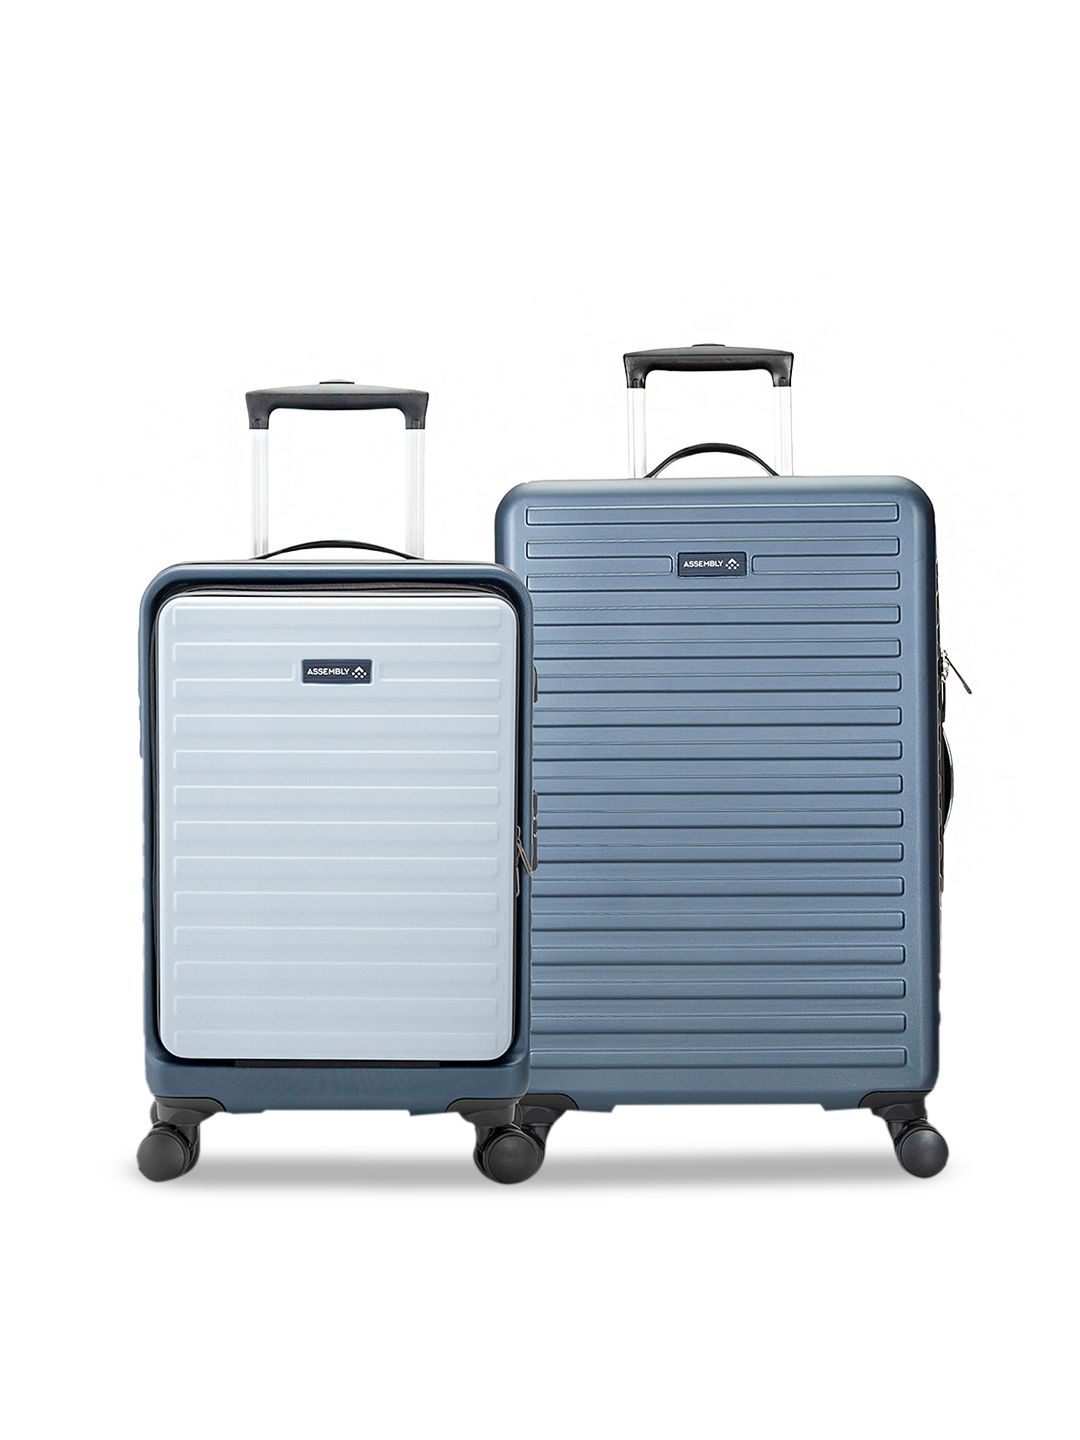 Assembly Set Of 2 Blue & Silver-Toned Check in Hardsided Trolley & Cabin Suitcases 67 L Price in India